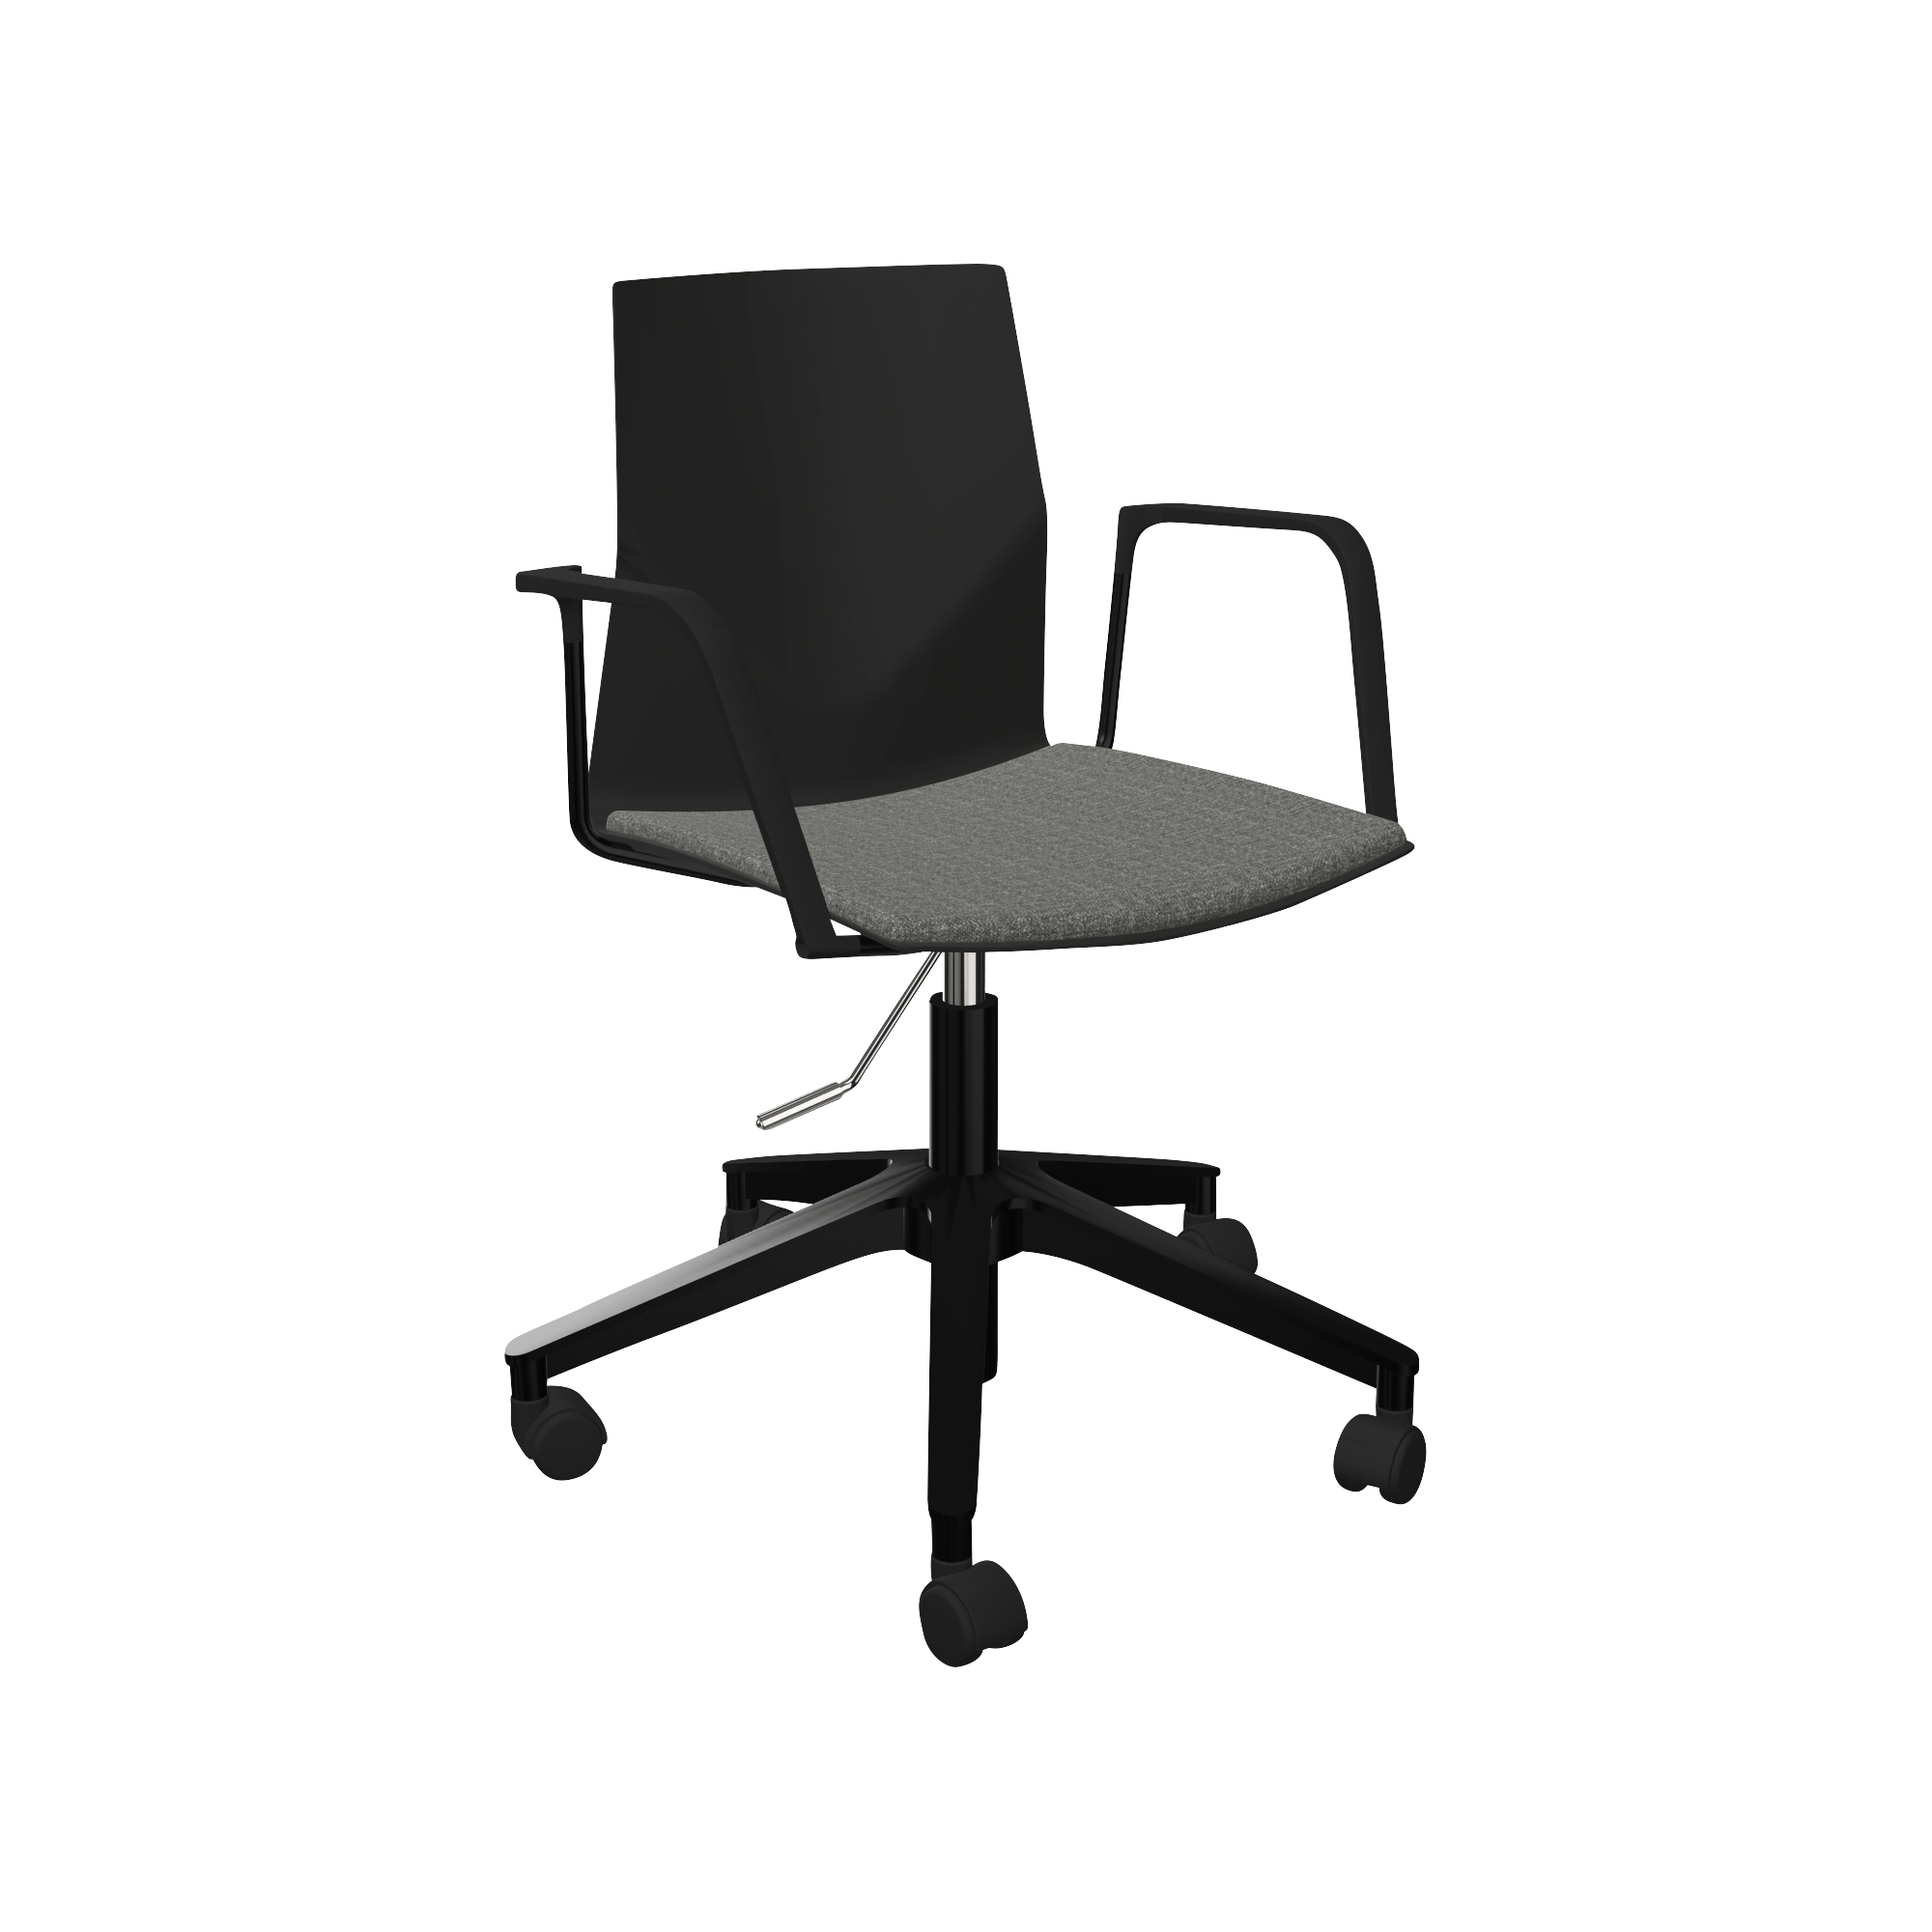 A black office chair with castors